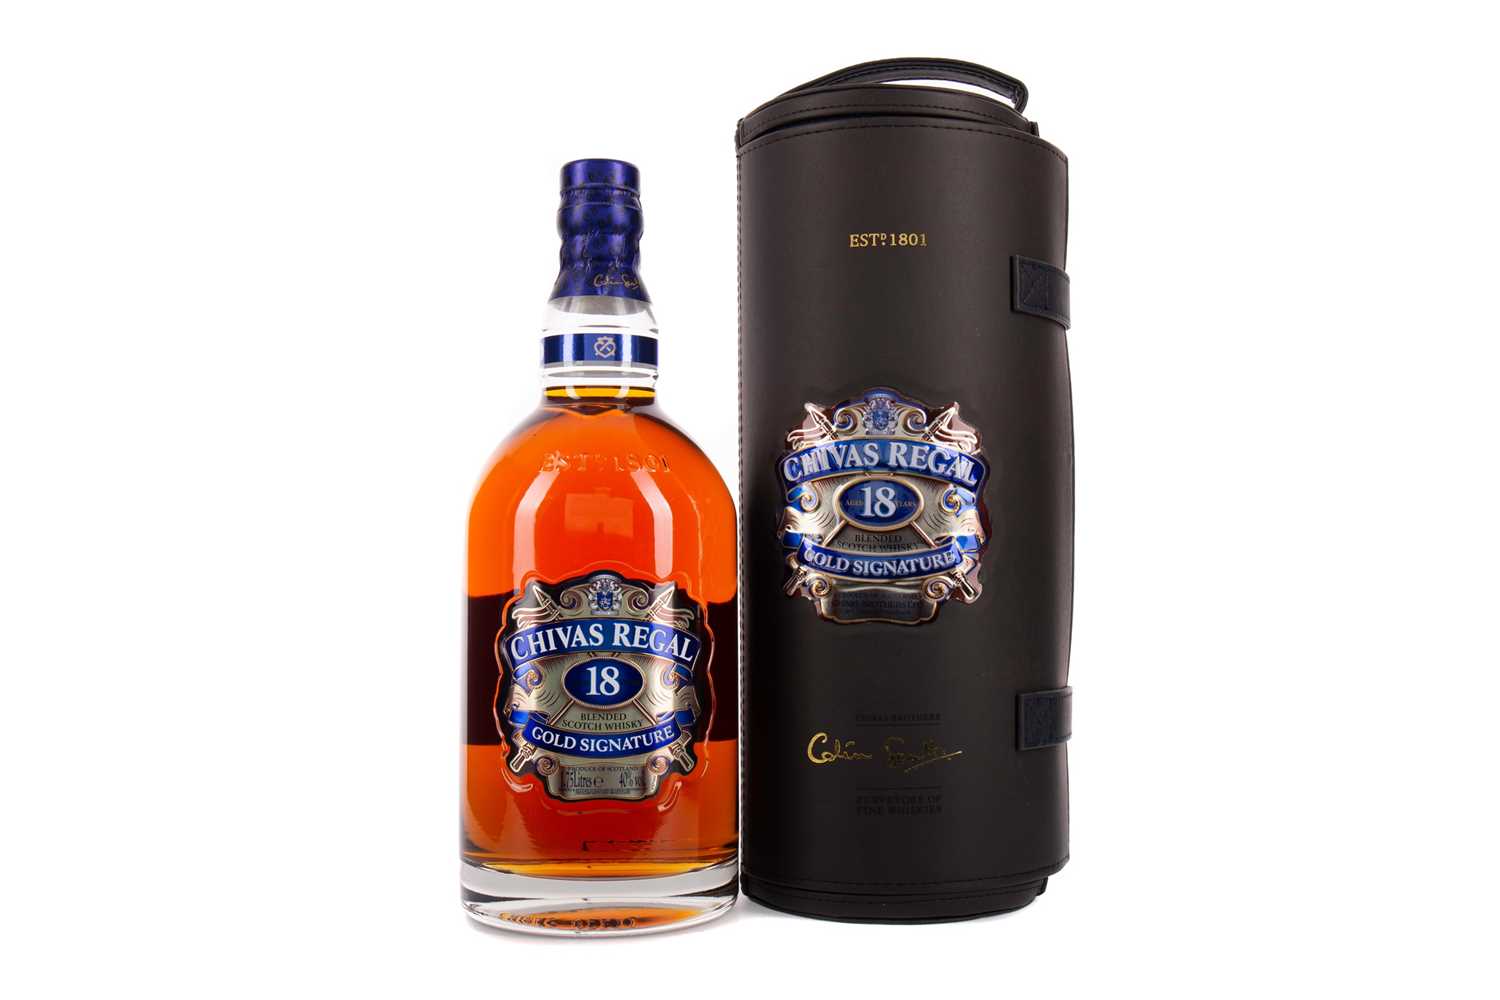 Lot 190 - CHIVAS REGAL GOLD SIGNATURE AGED 18 YEARS - 1.75 LITRES